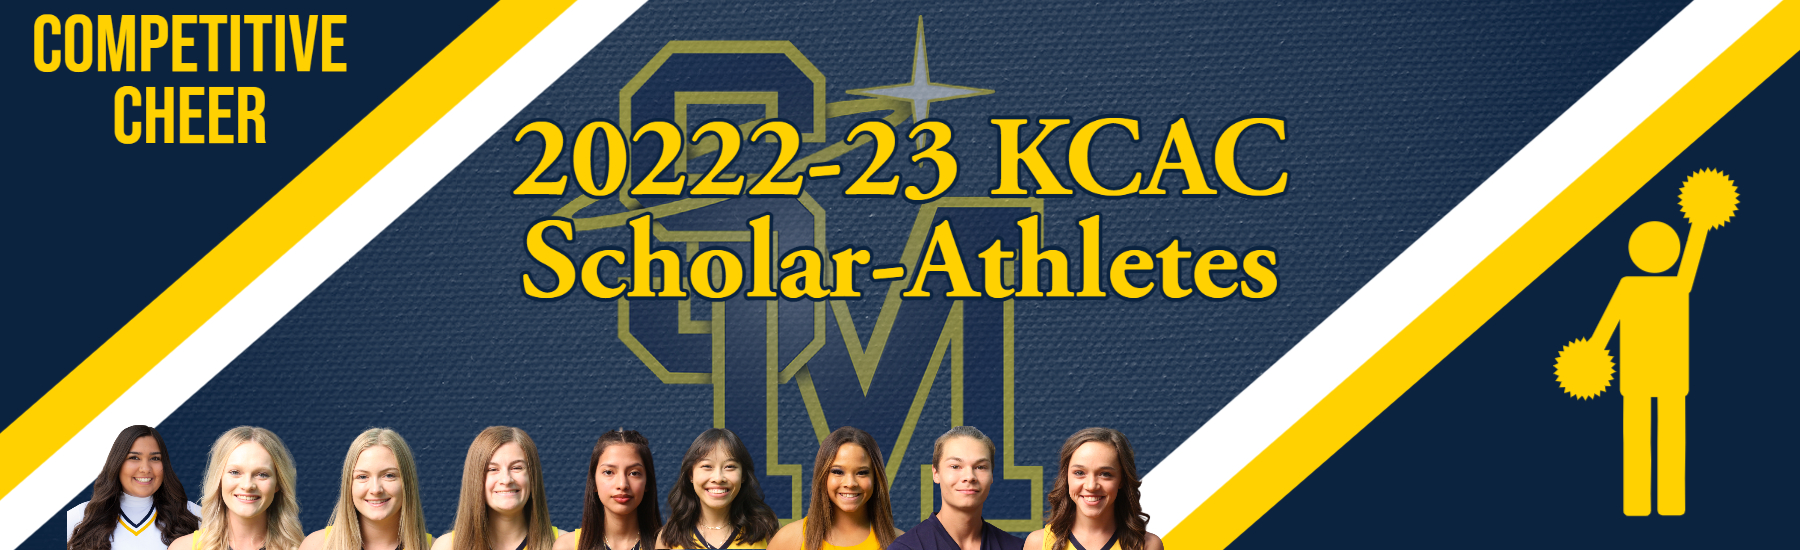 Competitive Cheer Tops KCAC With Nine Scholar-Athletes Being Named